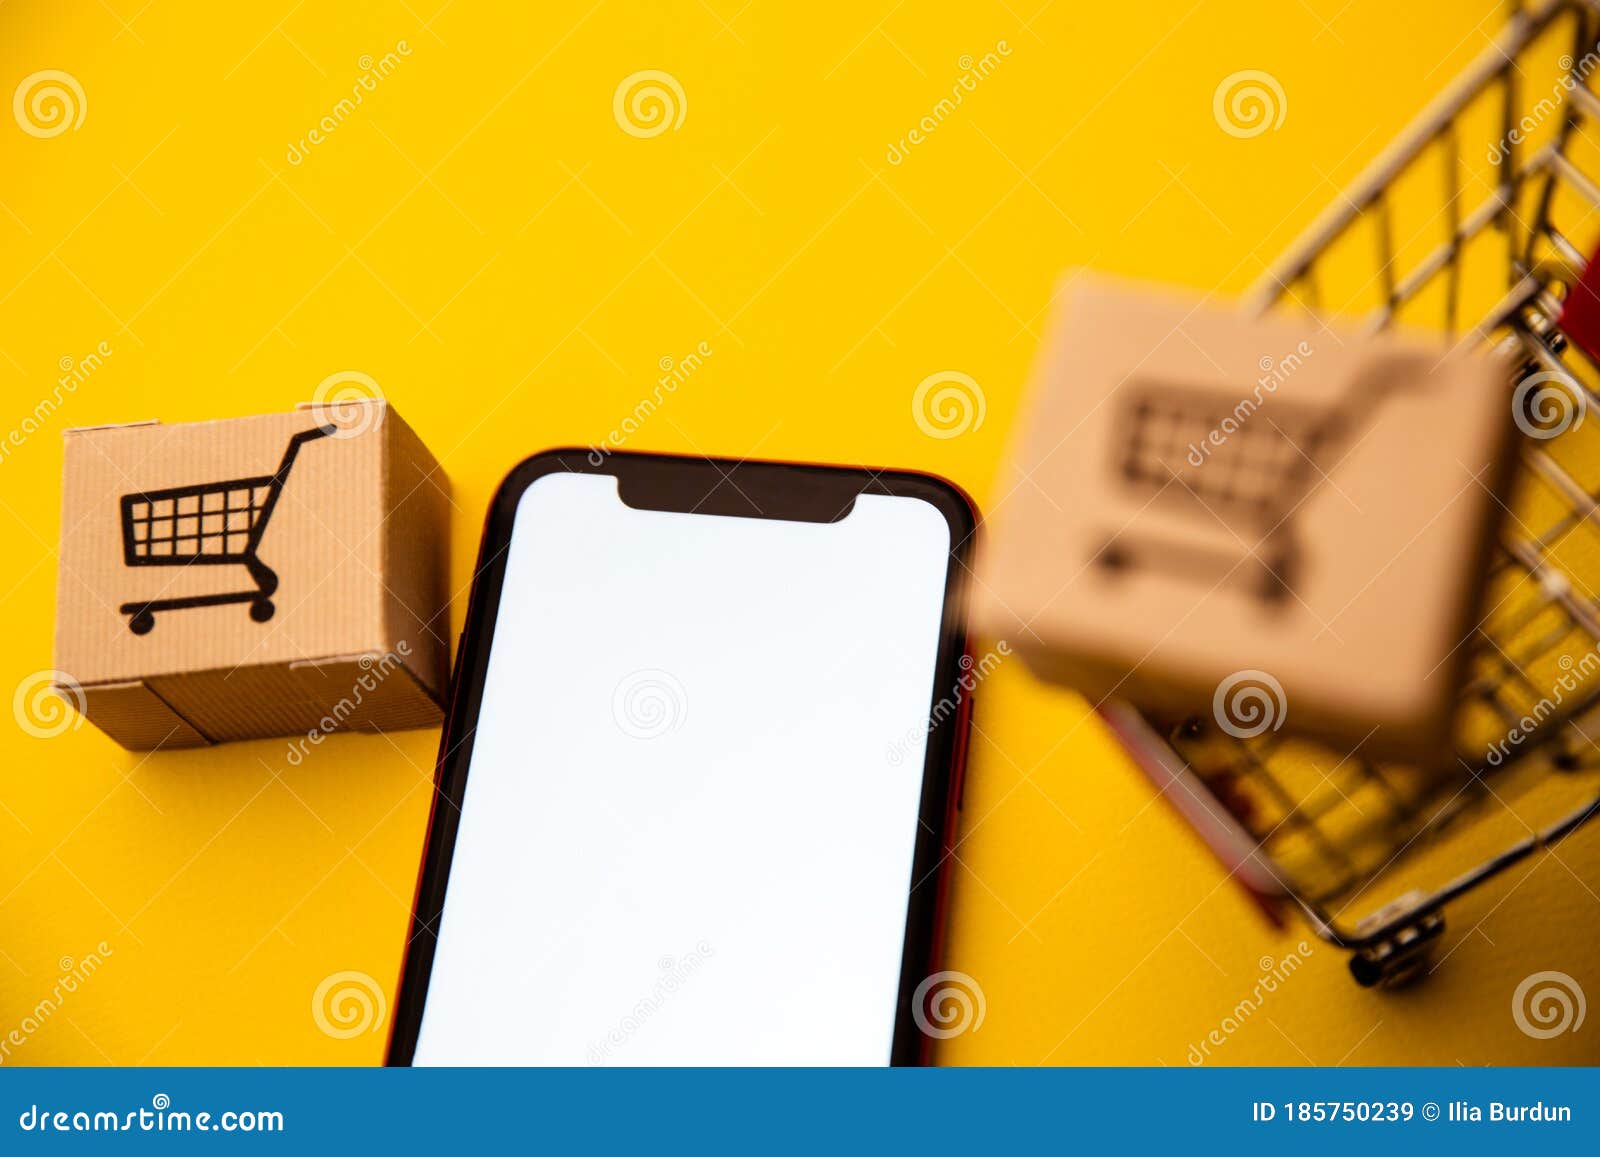 Online Shopping Concepts with Mockup Trolley, Boxes and Smartphone ...